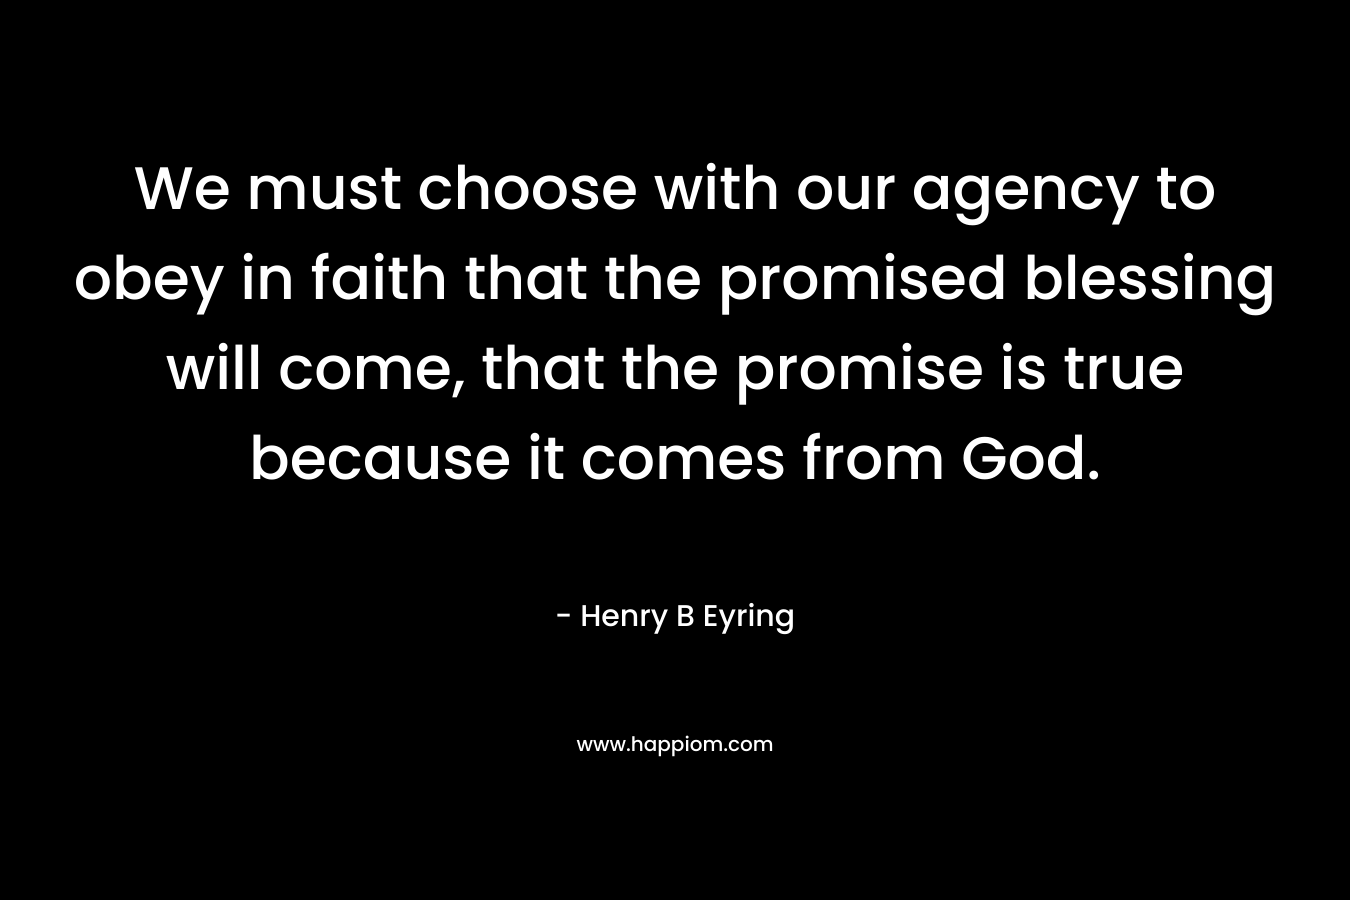 We must choose with our agency to obey in faith that the promised blessing will come, that the promise is true because it comes from God. – Henry B Eyring